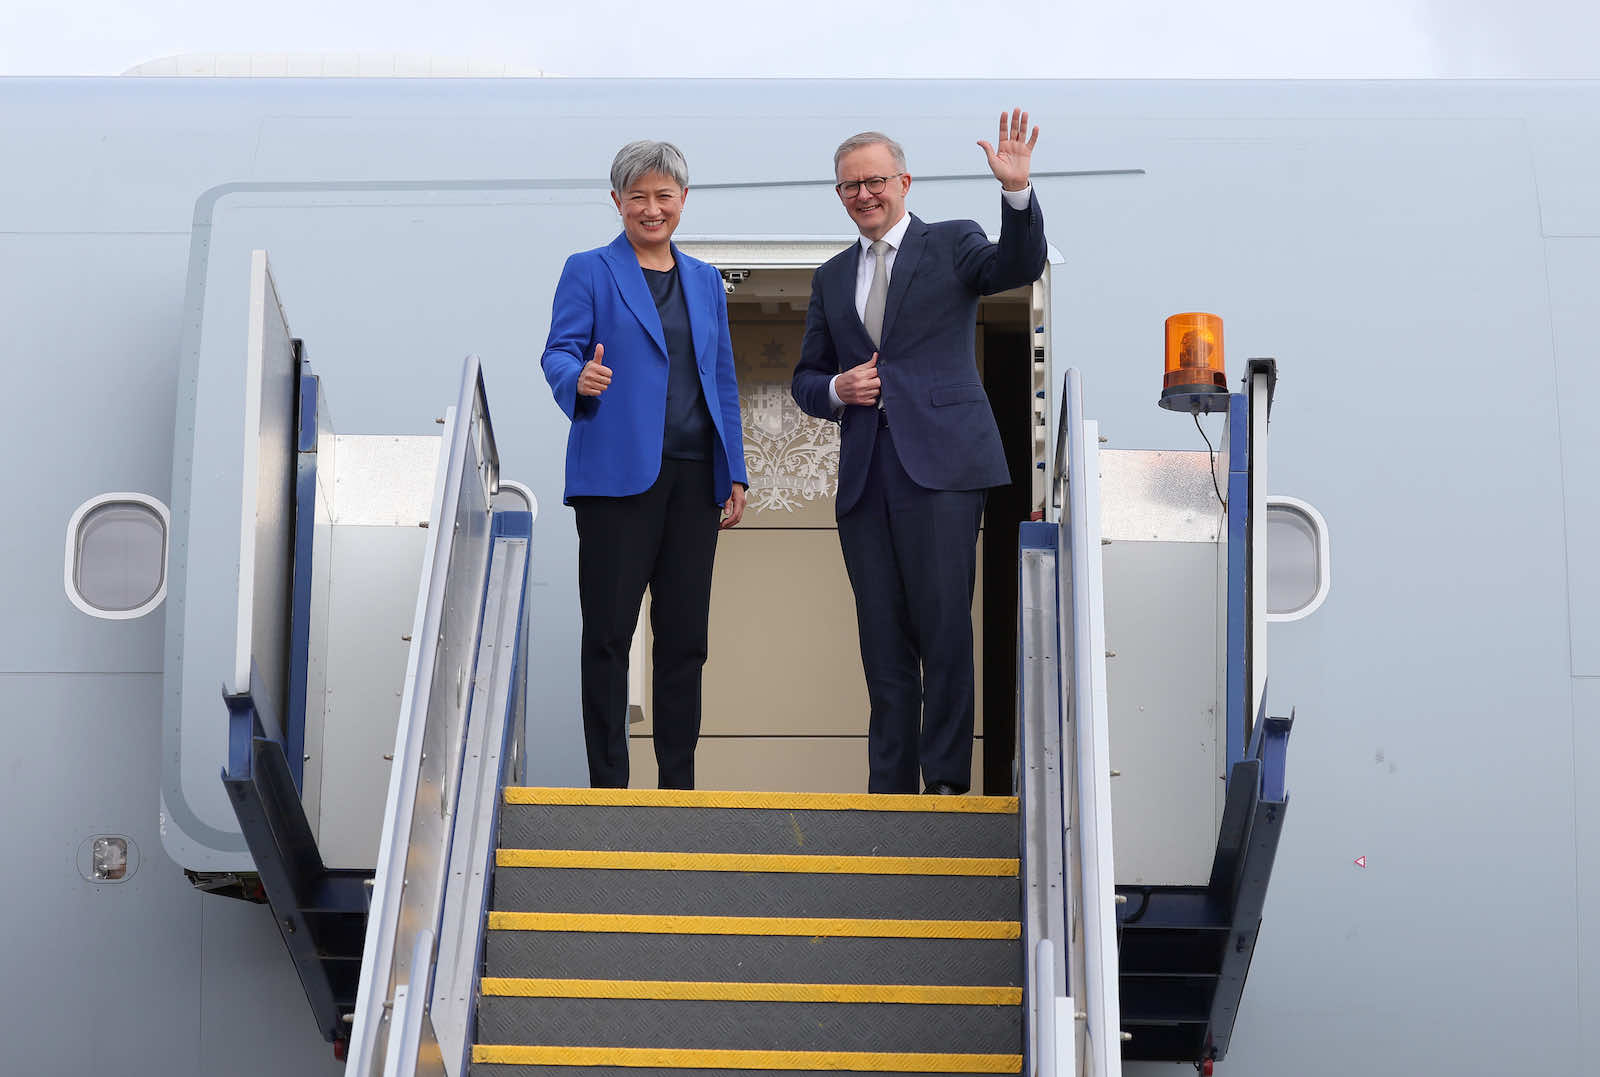 Prime Minister Anthony Albanese with newly appointed Foreign Minister Penny Wong ahead of their first official overseas travel, to Tokyo for the Quad meeting (David Gray/Getty Images)